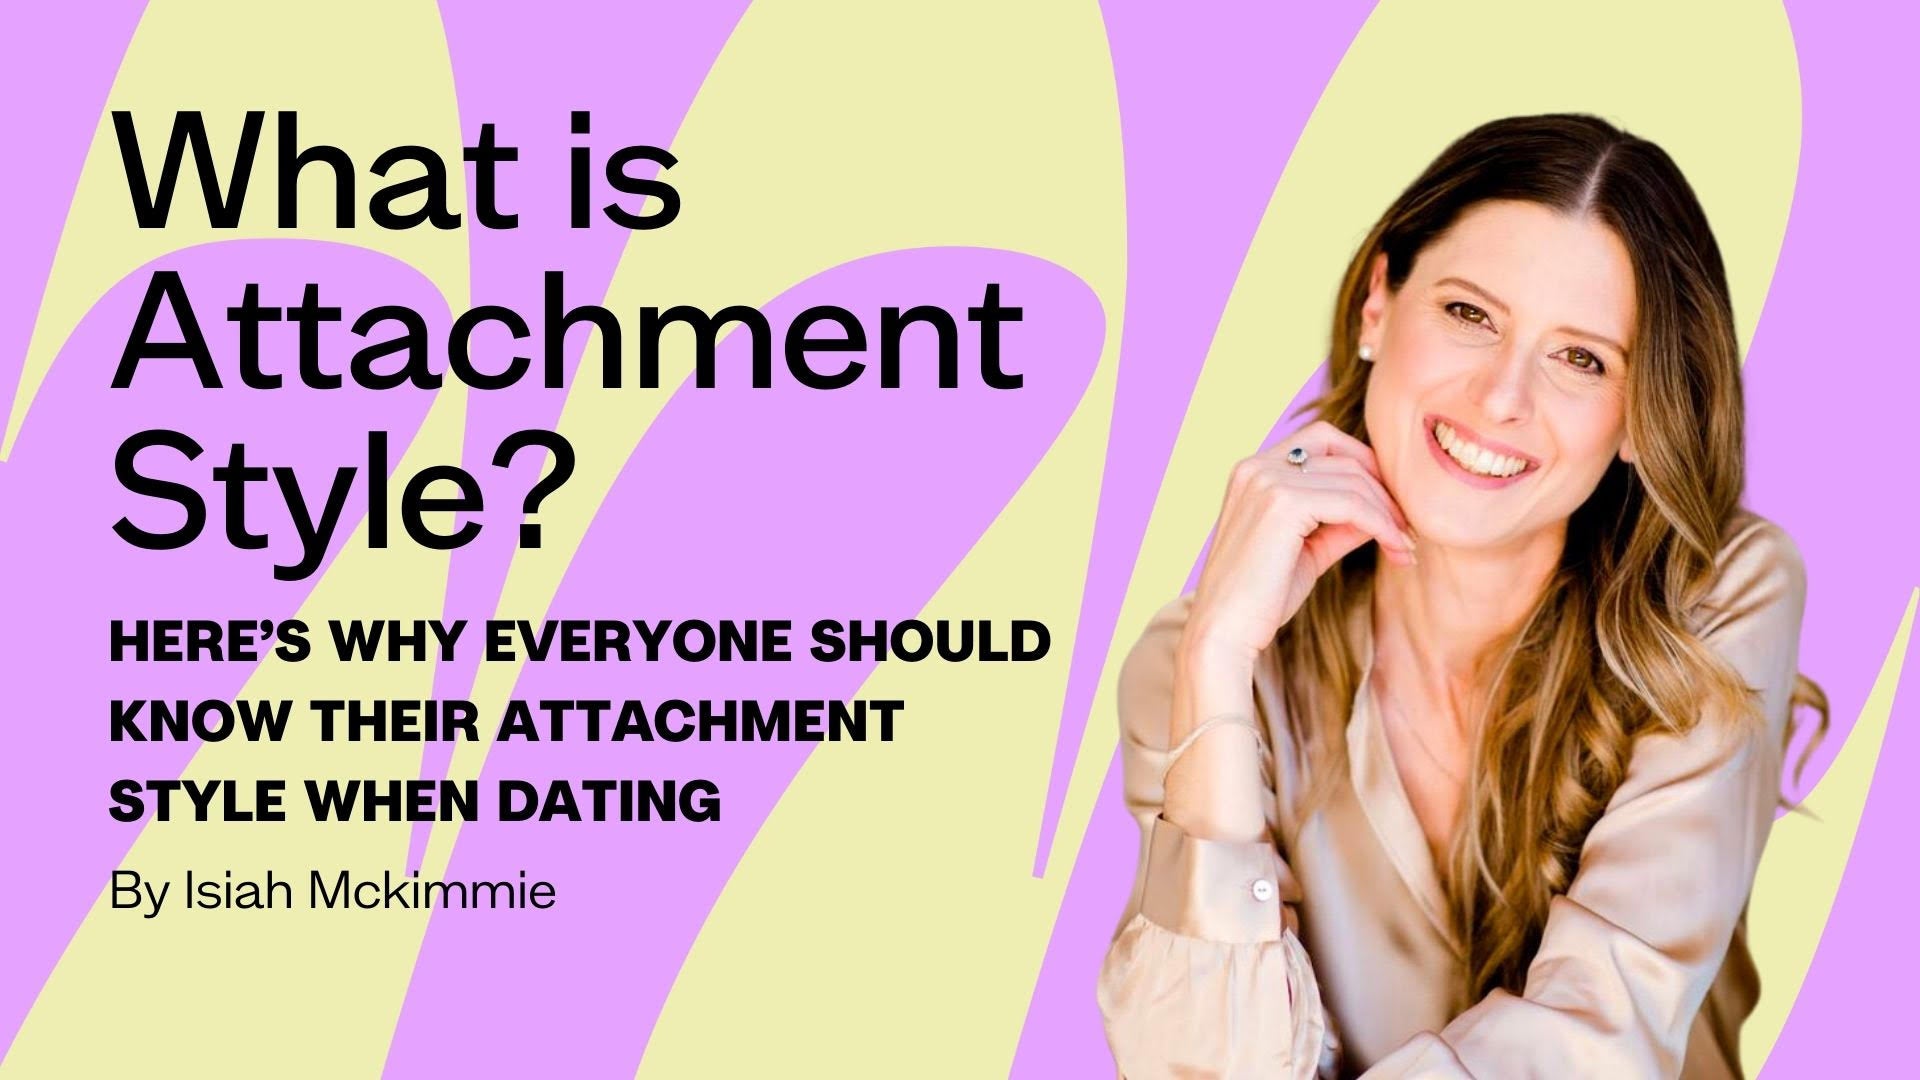 What is Attachment Style when dating?